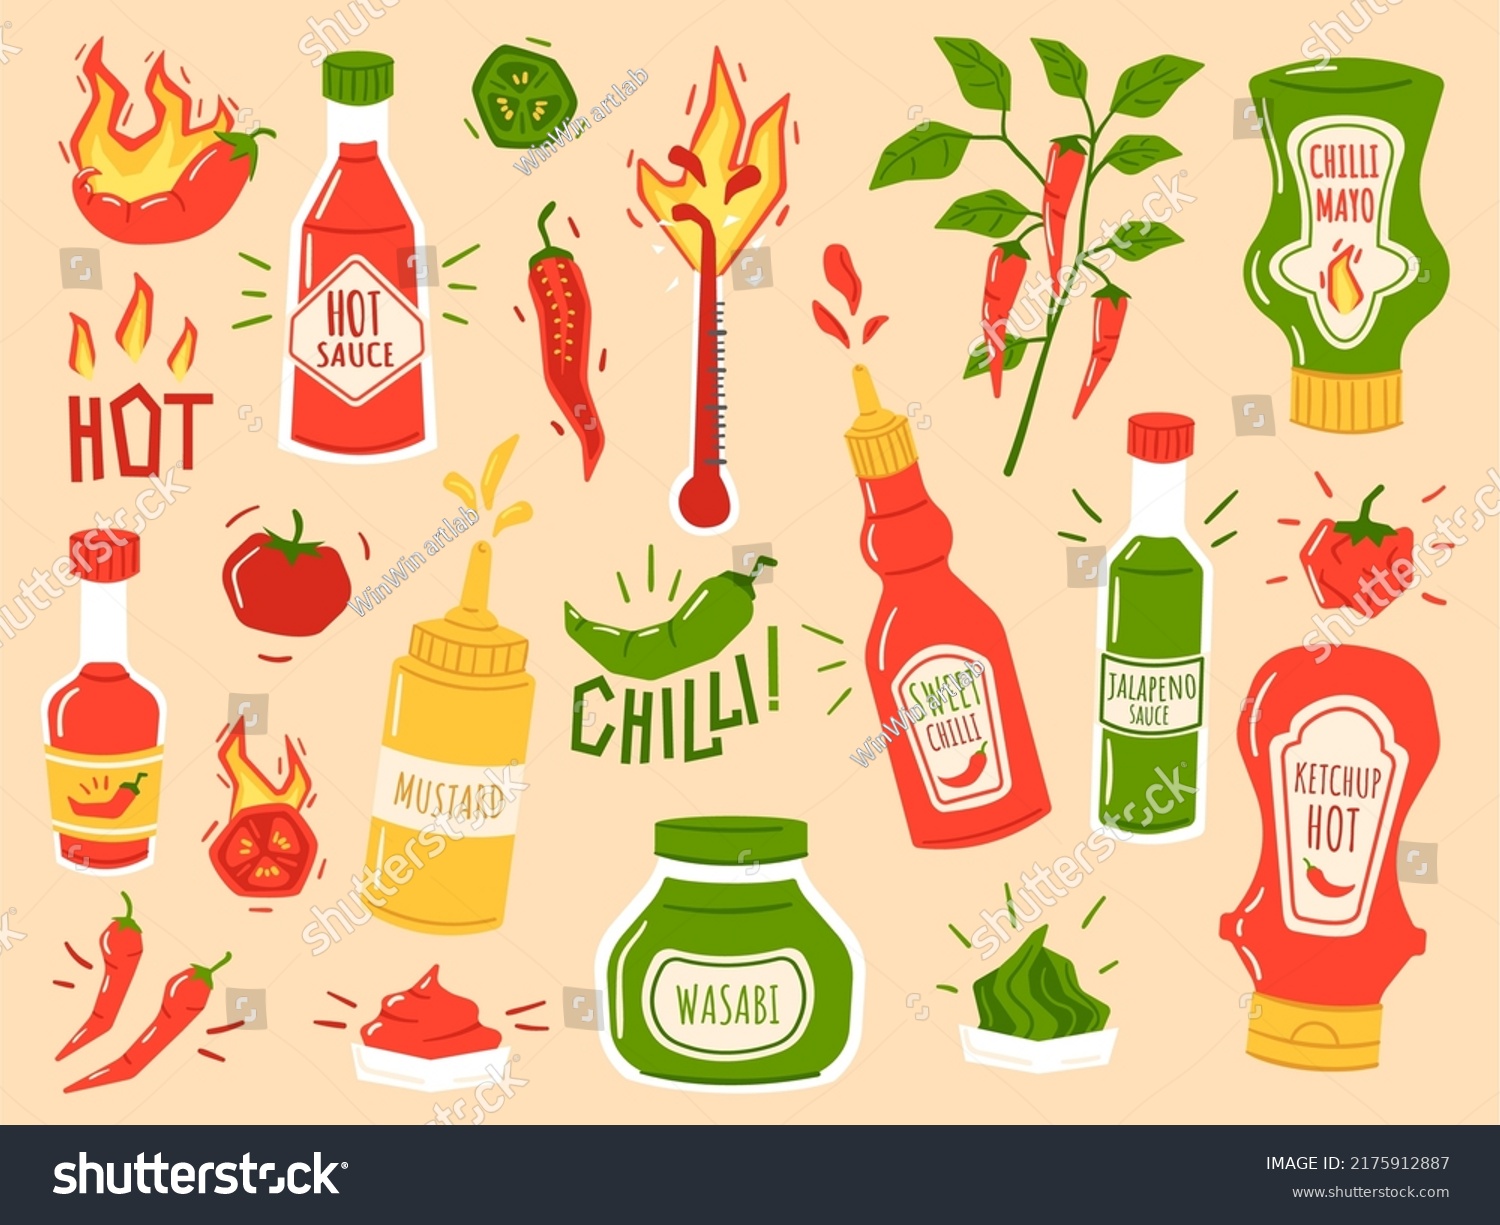 Hot sauces. Sweet chilli, spicy mayo and ketchup bottles. Wasabi, mustard and flaming peppers vector Illustration set. Food natural ingredients used for spices and dips, burning vegetables #2175912887